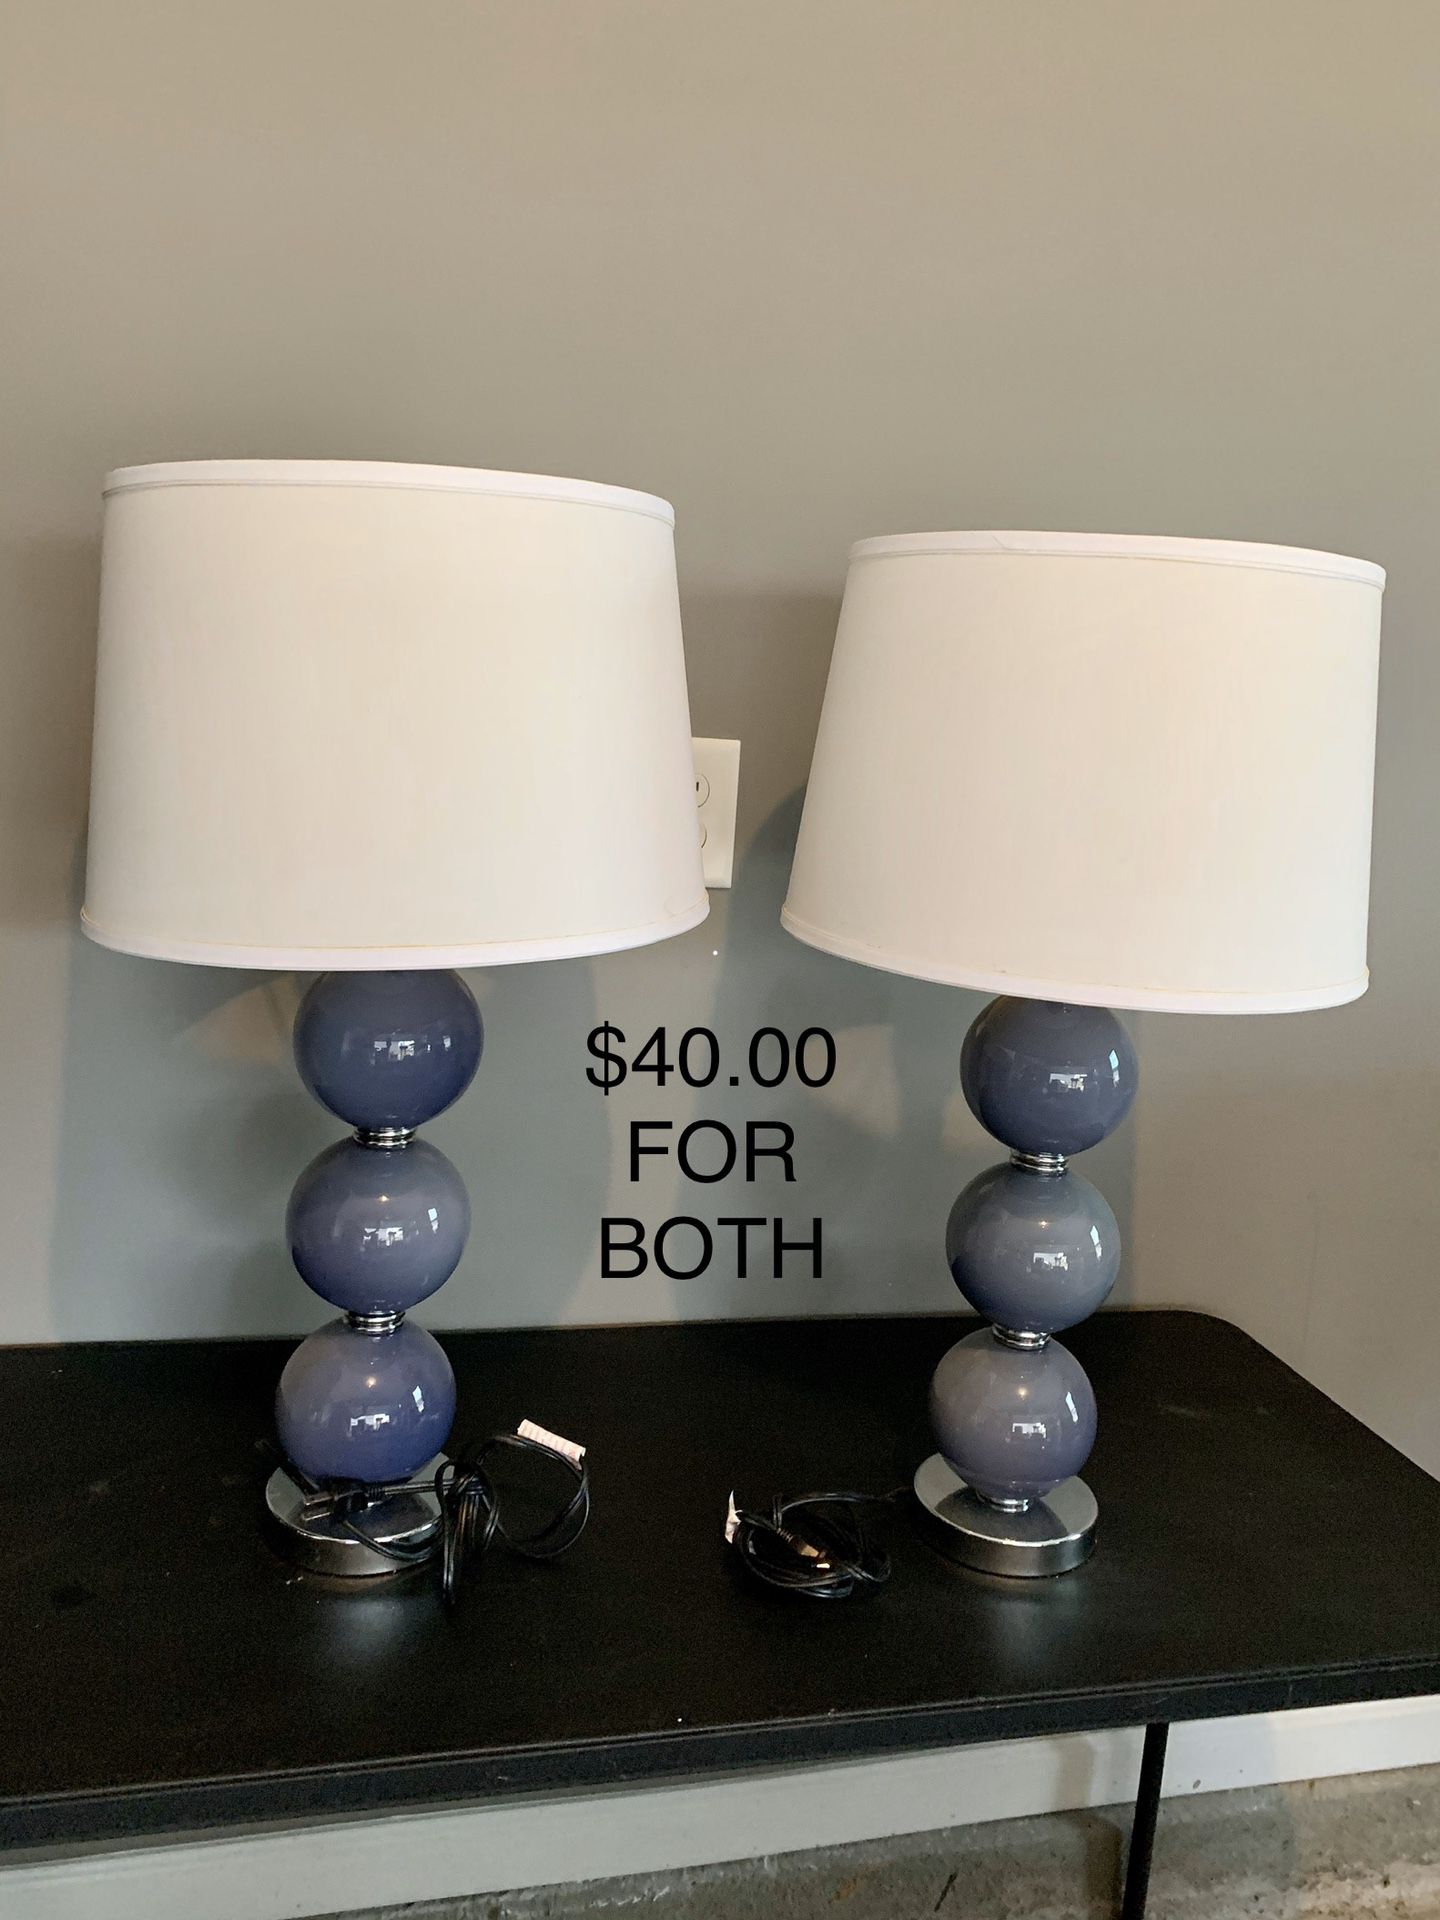 PAIR OF LAMPS BRAND NEW